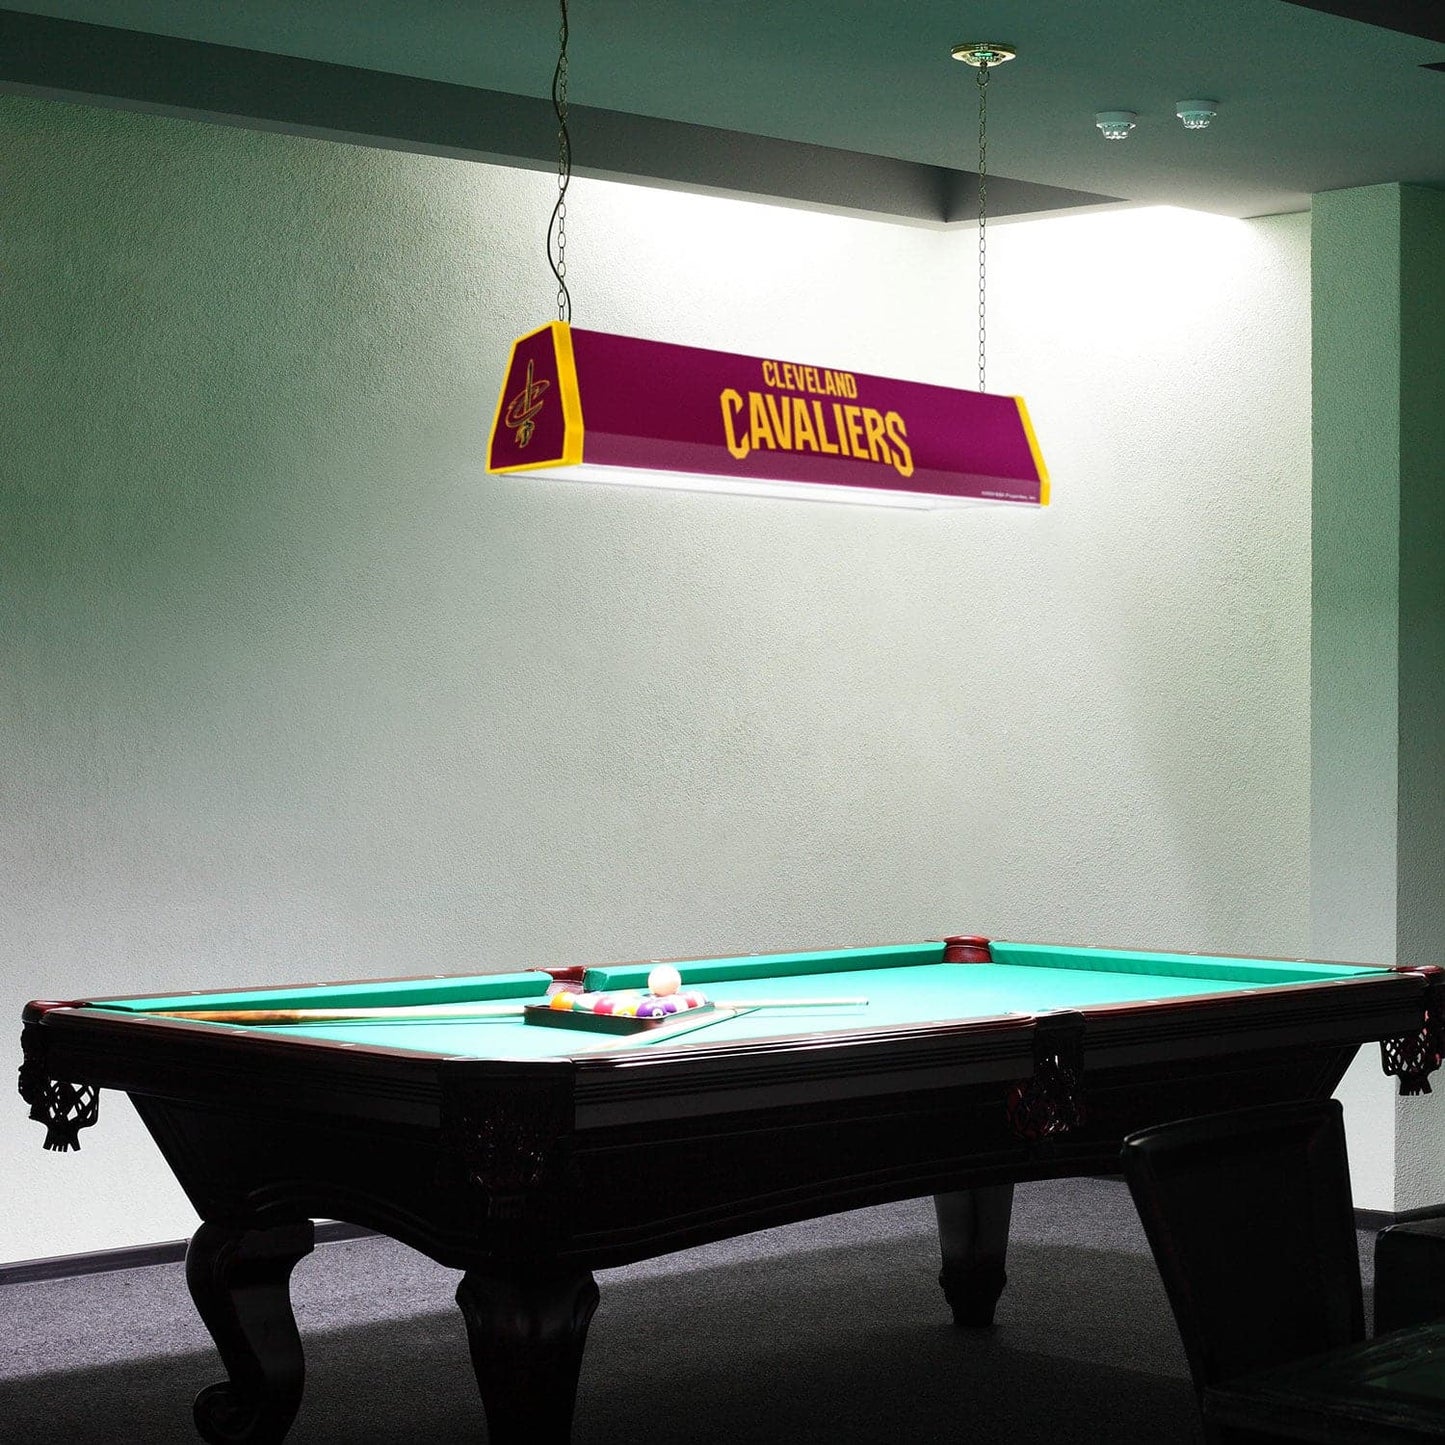 Cleveland Cavaliers: Standard Pool Table Light - The Fan-Brand